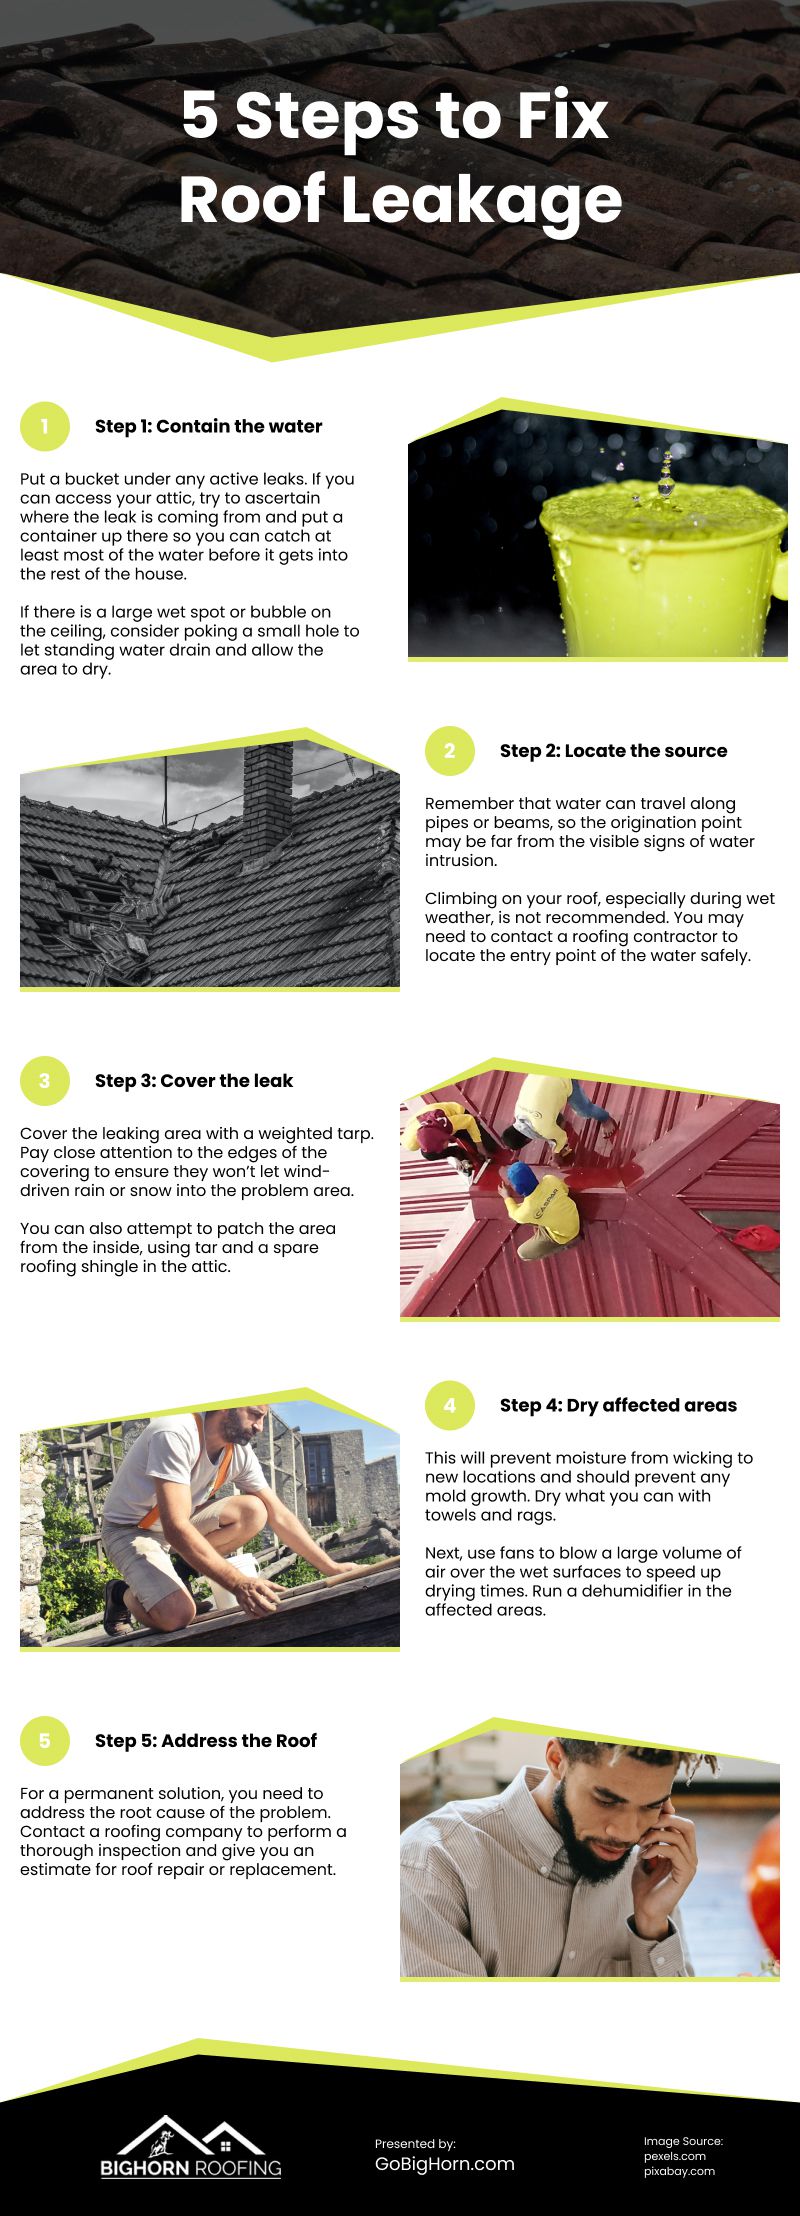 5 Steps to Fix Roof Leakage Infographic